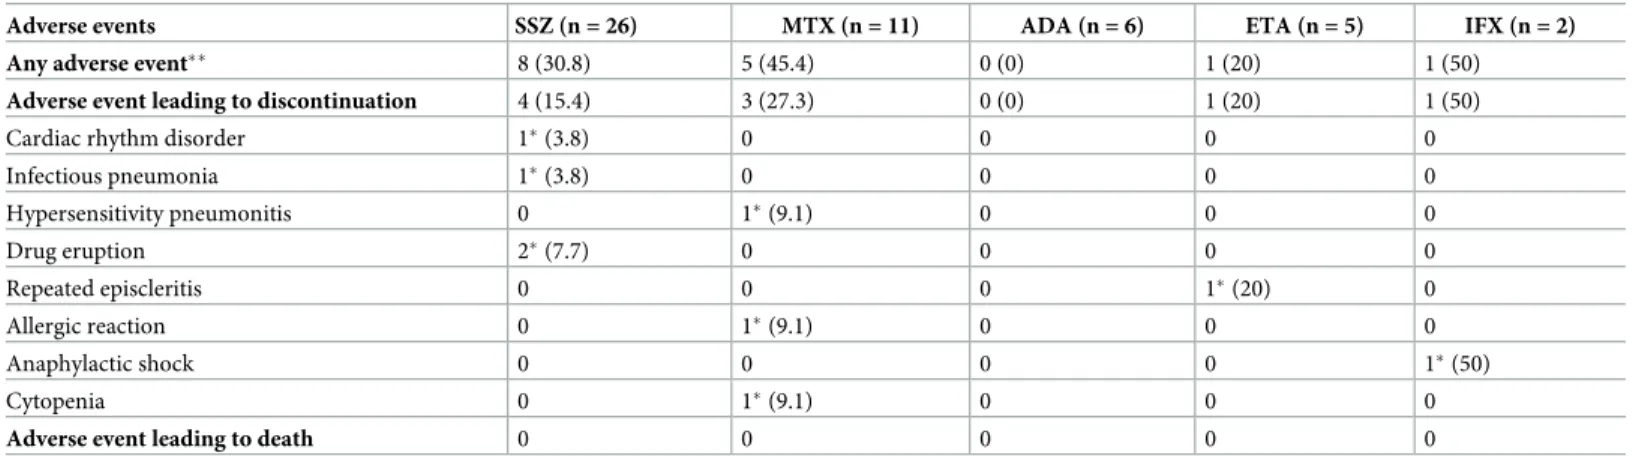 Table 3. Adverse events in patients with HLA-B27-associated uveitis receiving systemic treatments.